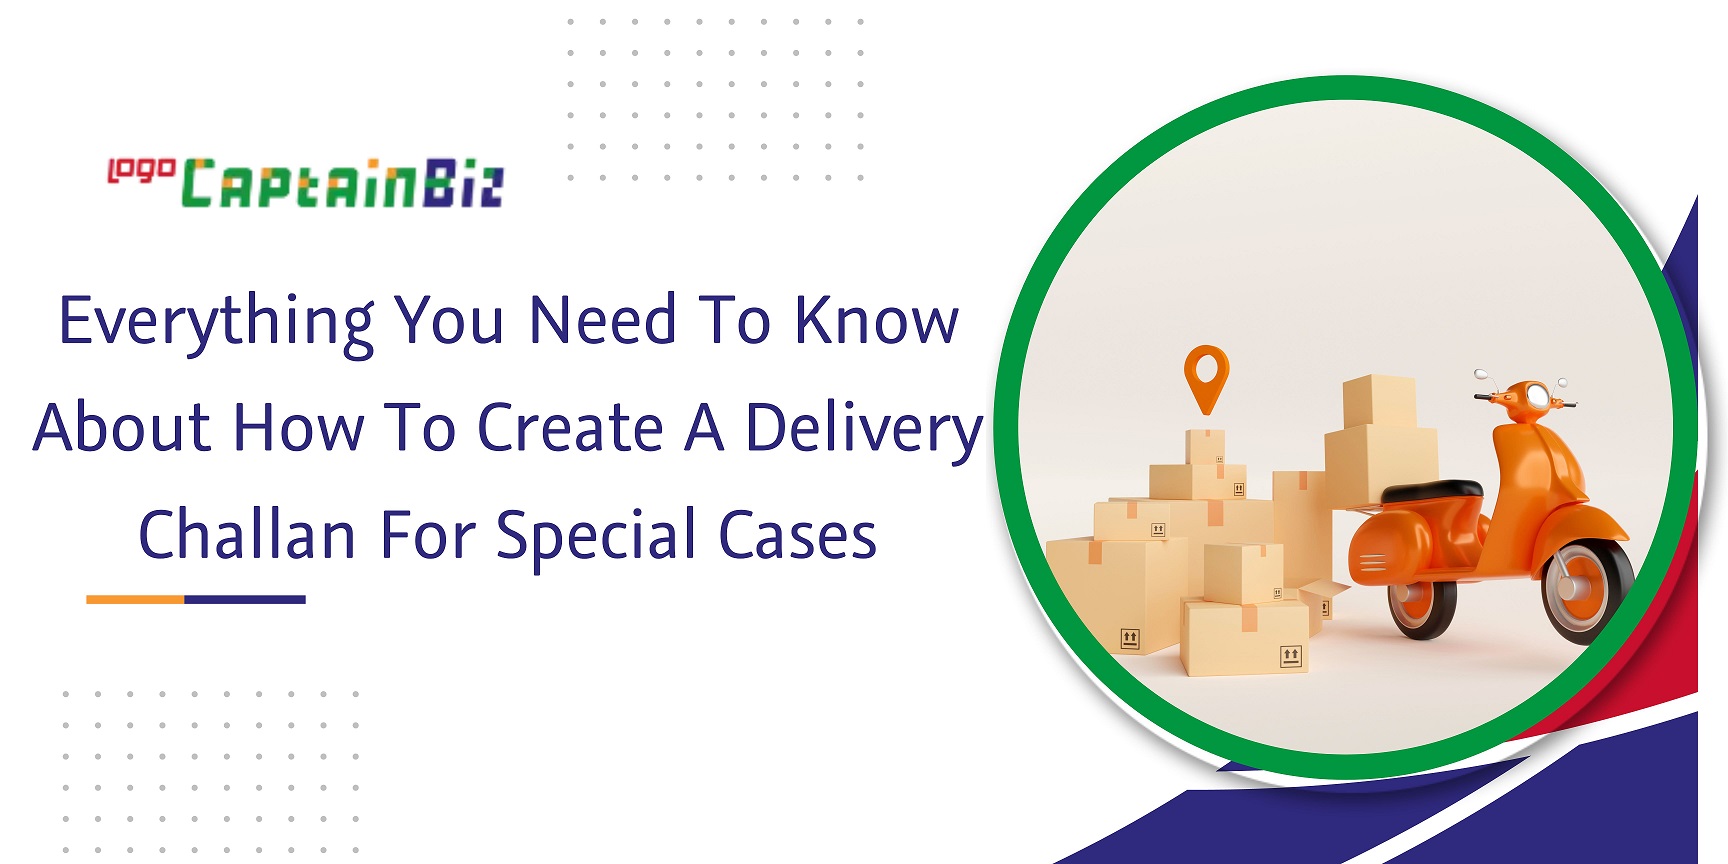 CaptainBiz: everything you need to know about how to create a delivery challan For special cases